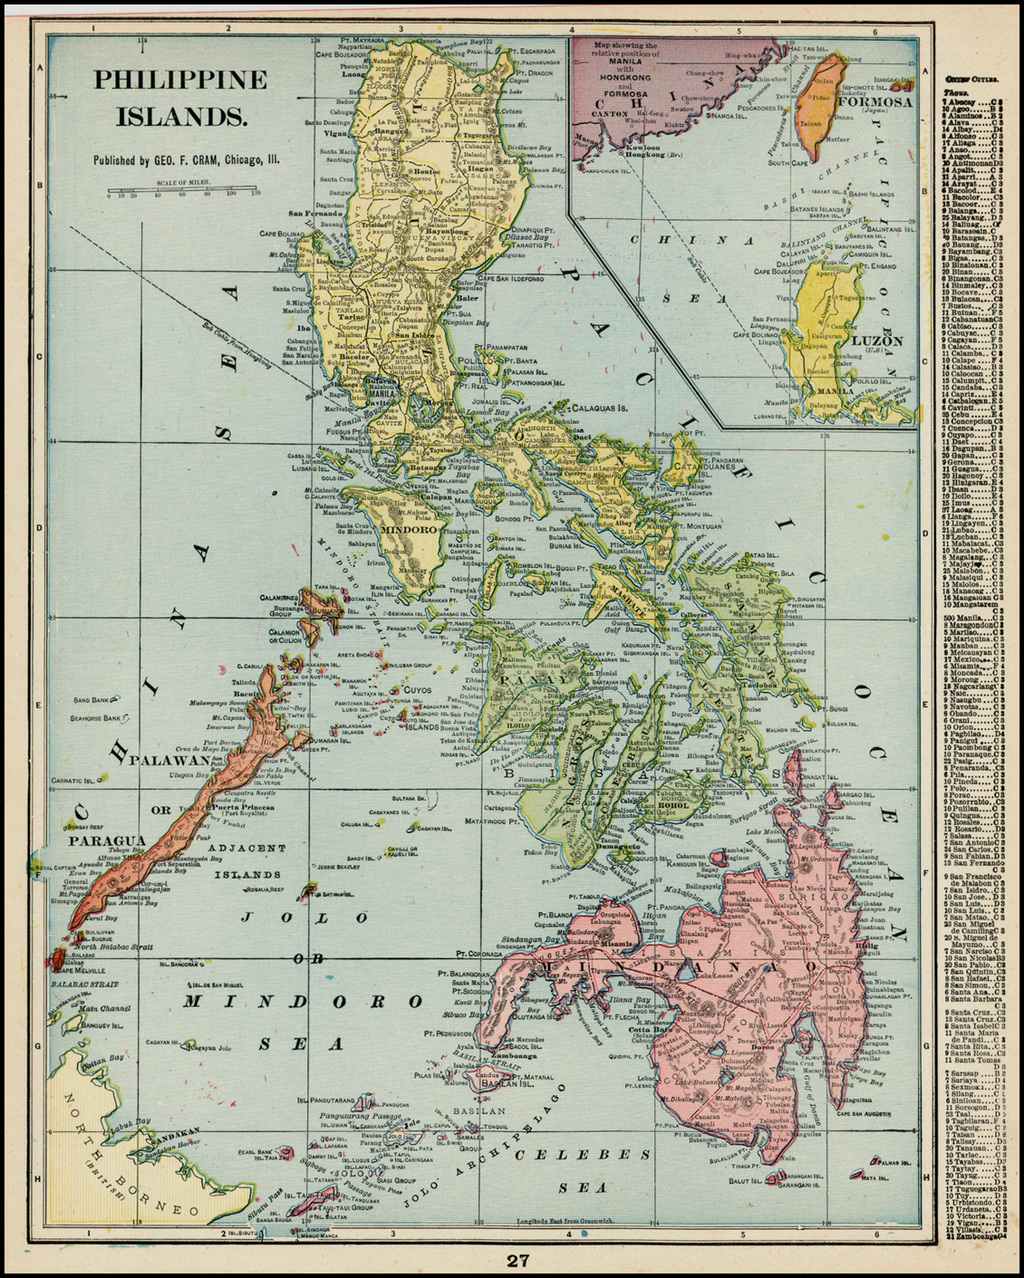 Philippine Islands - Barry Lawrence Ruderman Antique Maps Inc.